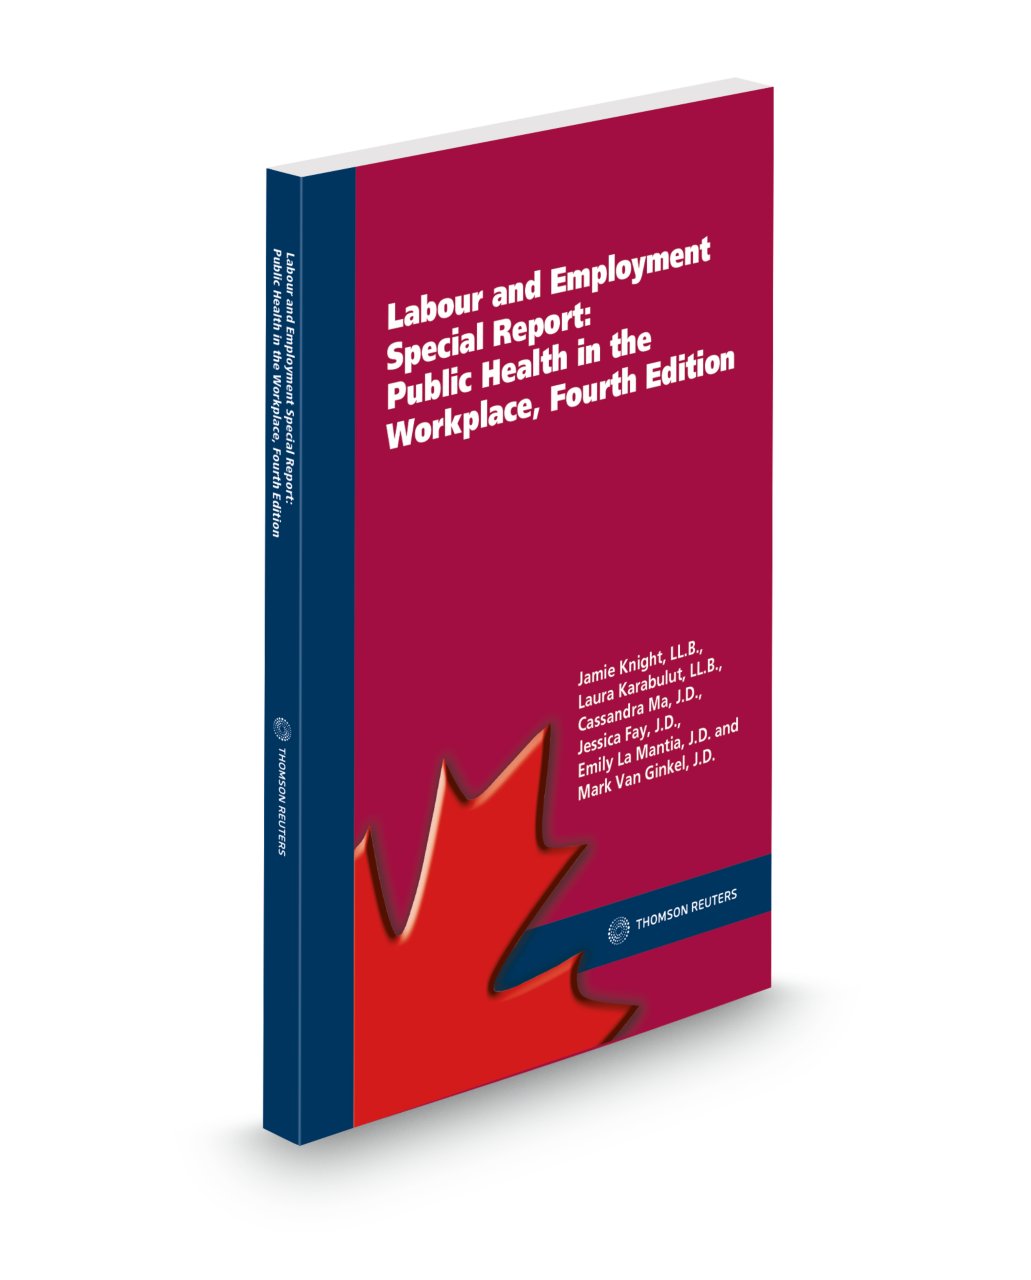 Cover of Labour and Employment Special Report - Public Health in the Workplace, 4th Edition, Softbound book